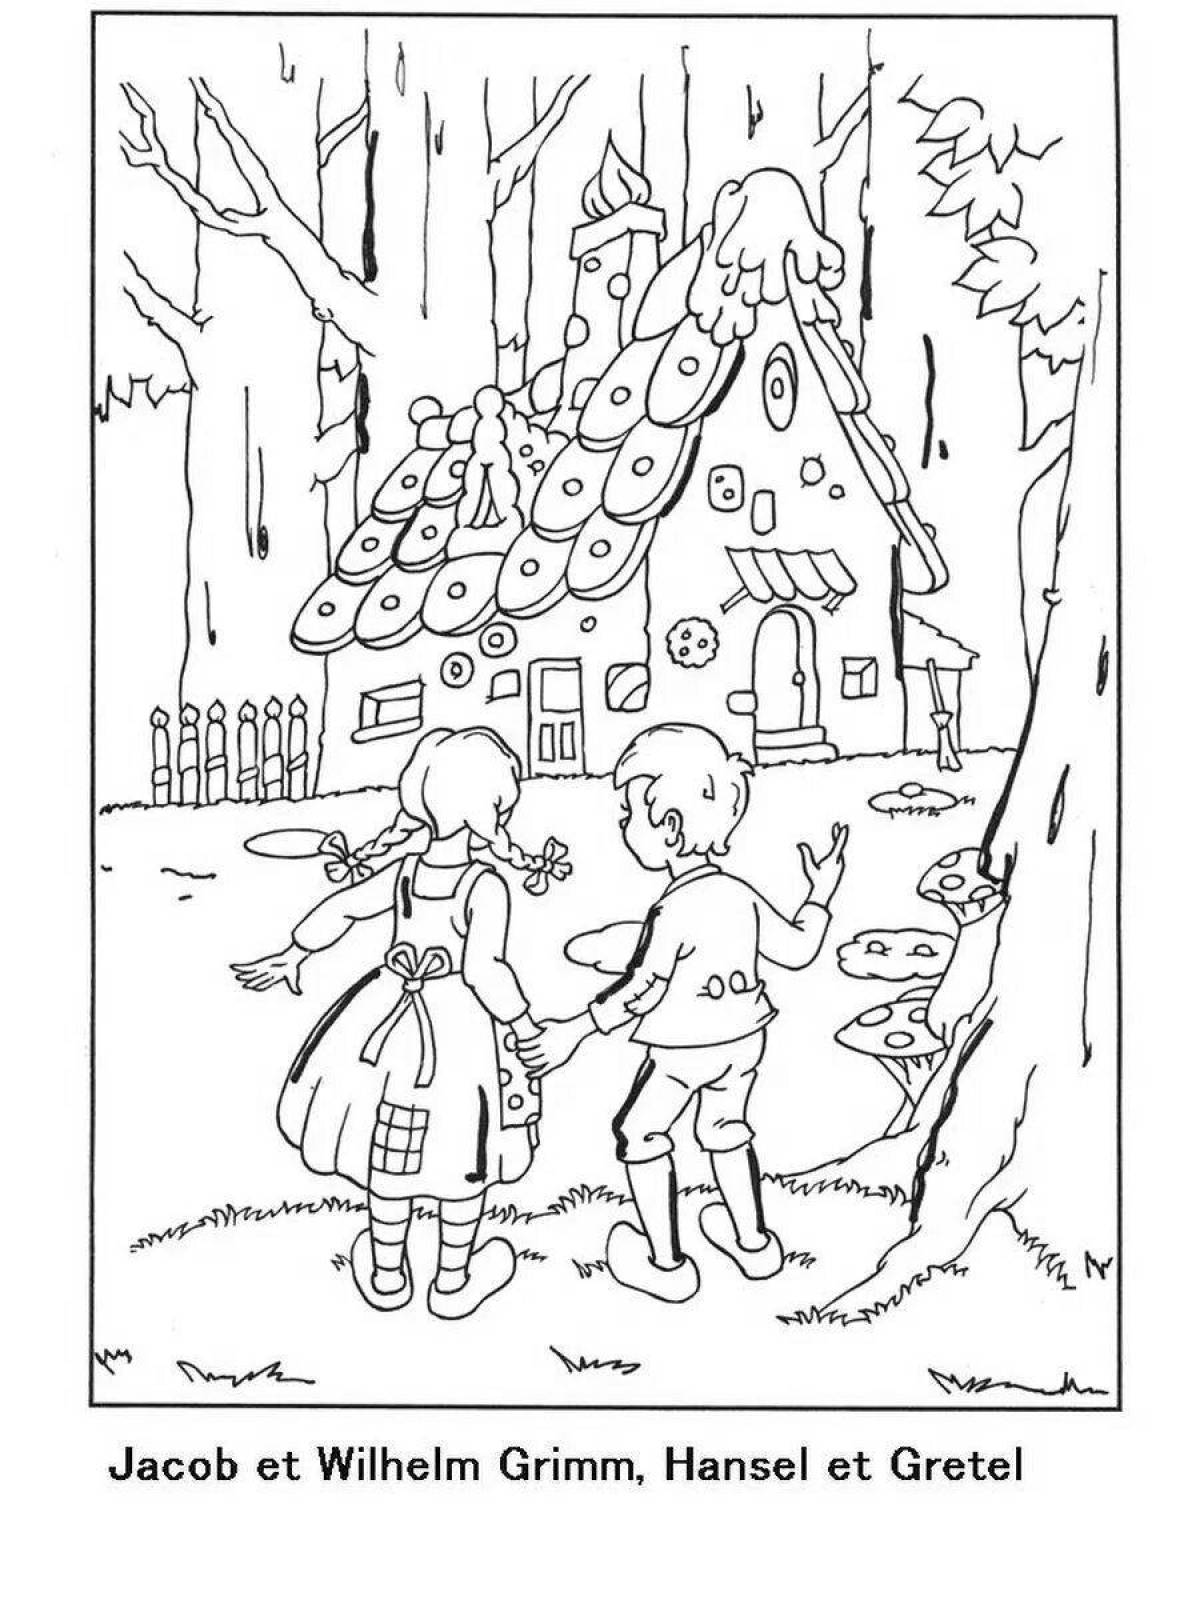 Great Hansel and Gretel coloring book magical agency